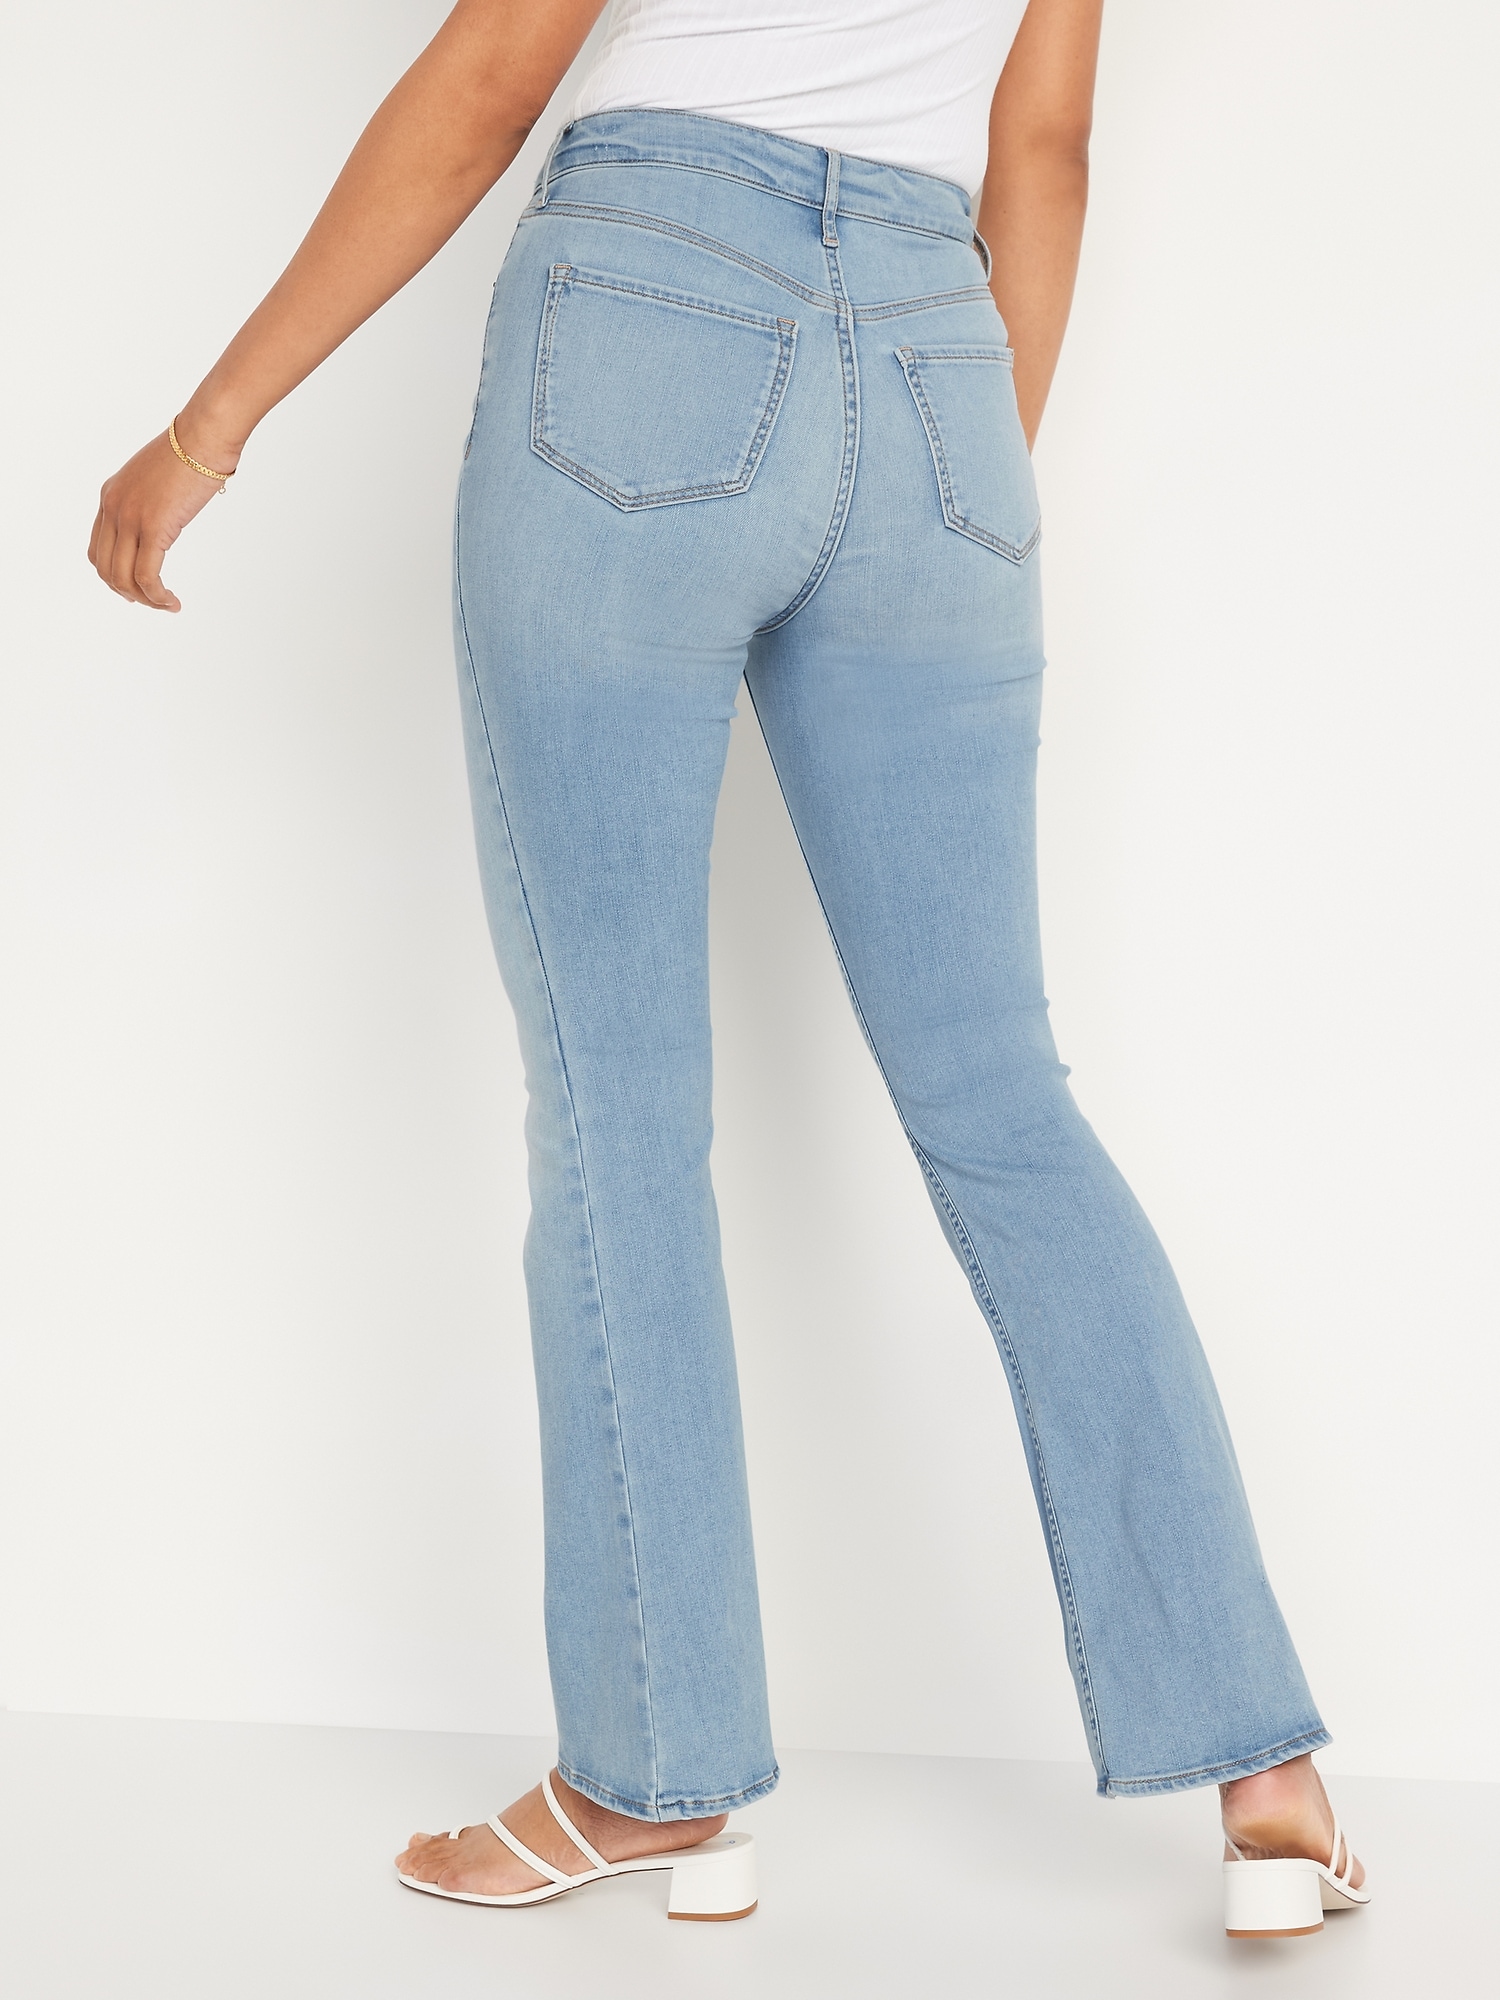 FitsYou 3-Sizes-In-One High-Waisted Old Flare for Navy Jeans | Women Extra